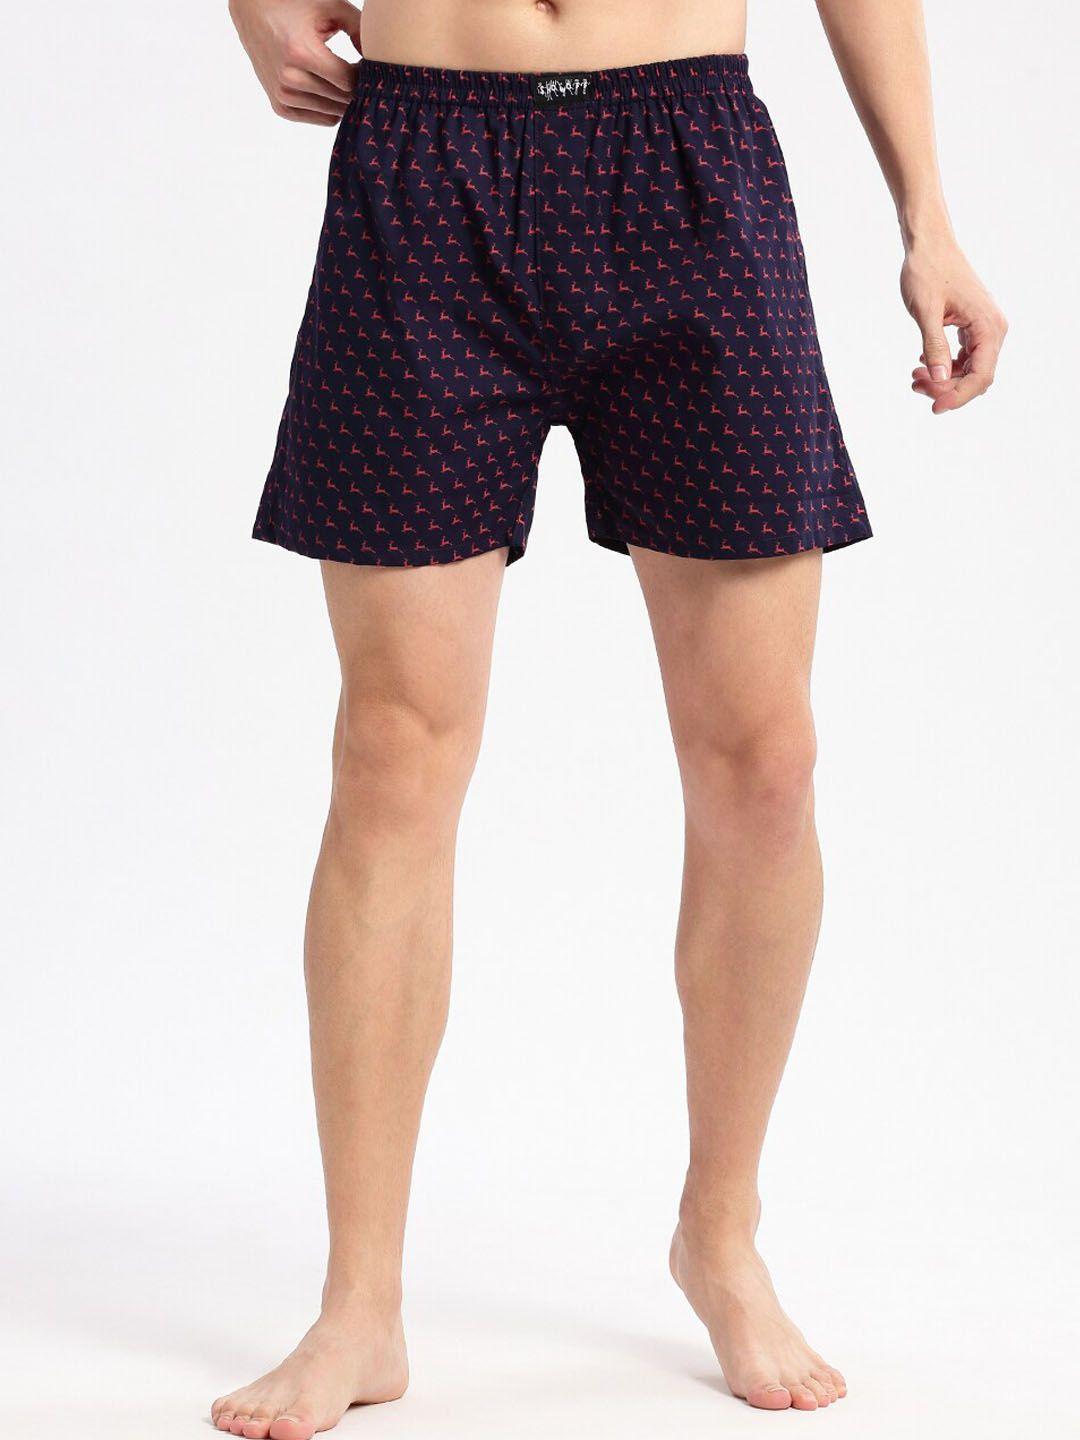 showoff-deer-printed-cotton-boxers-am-141-18